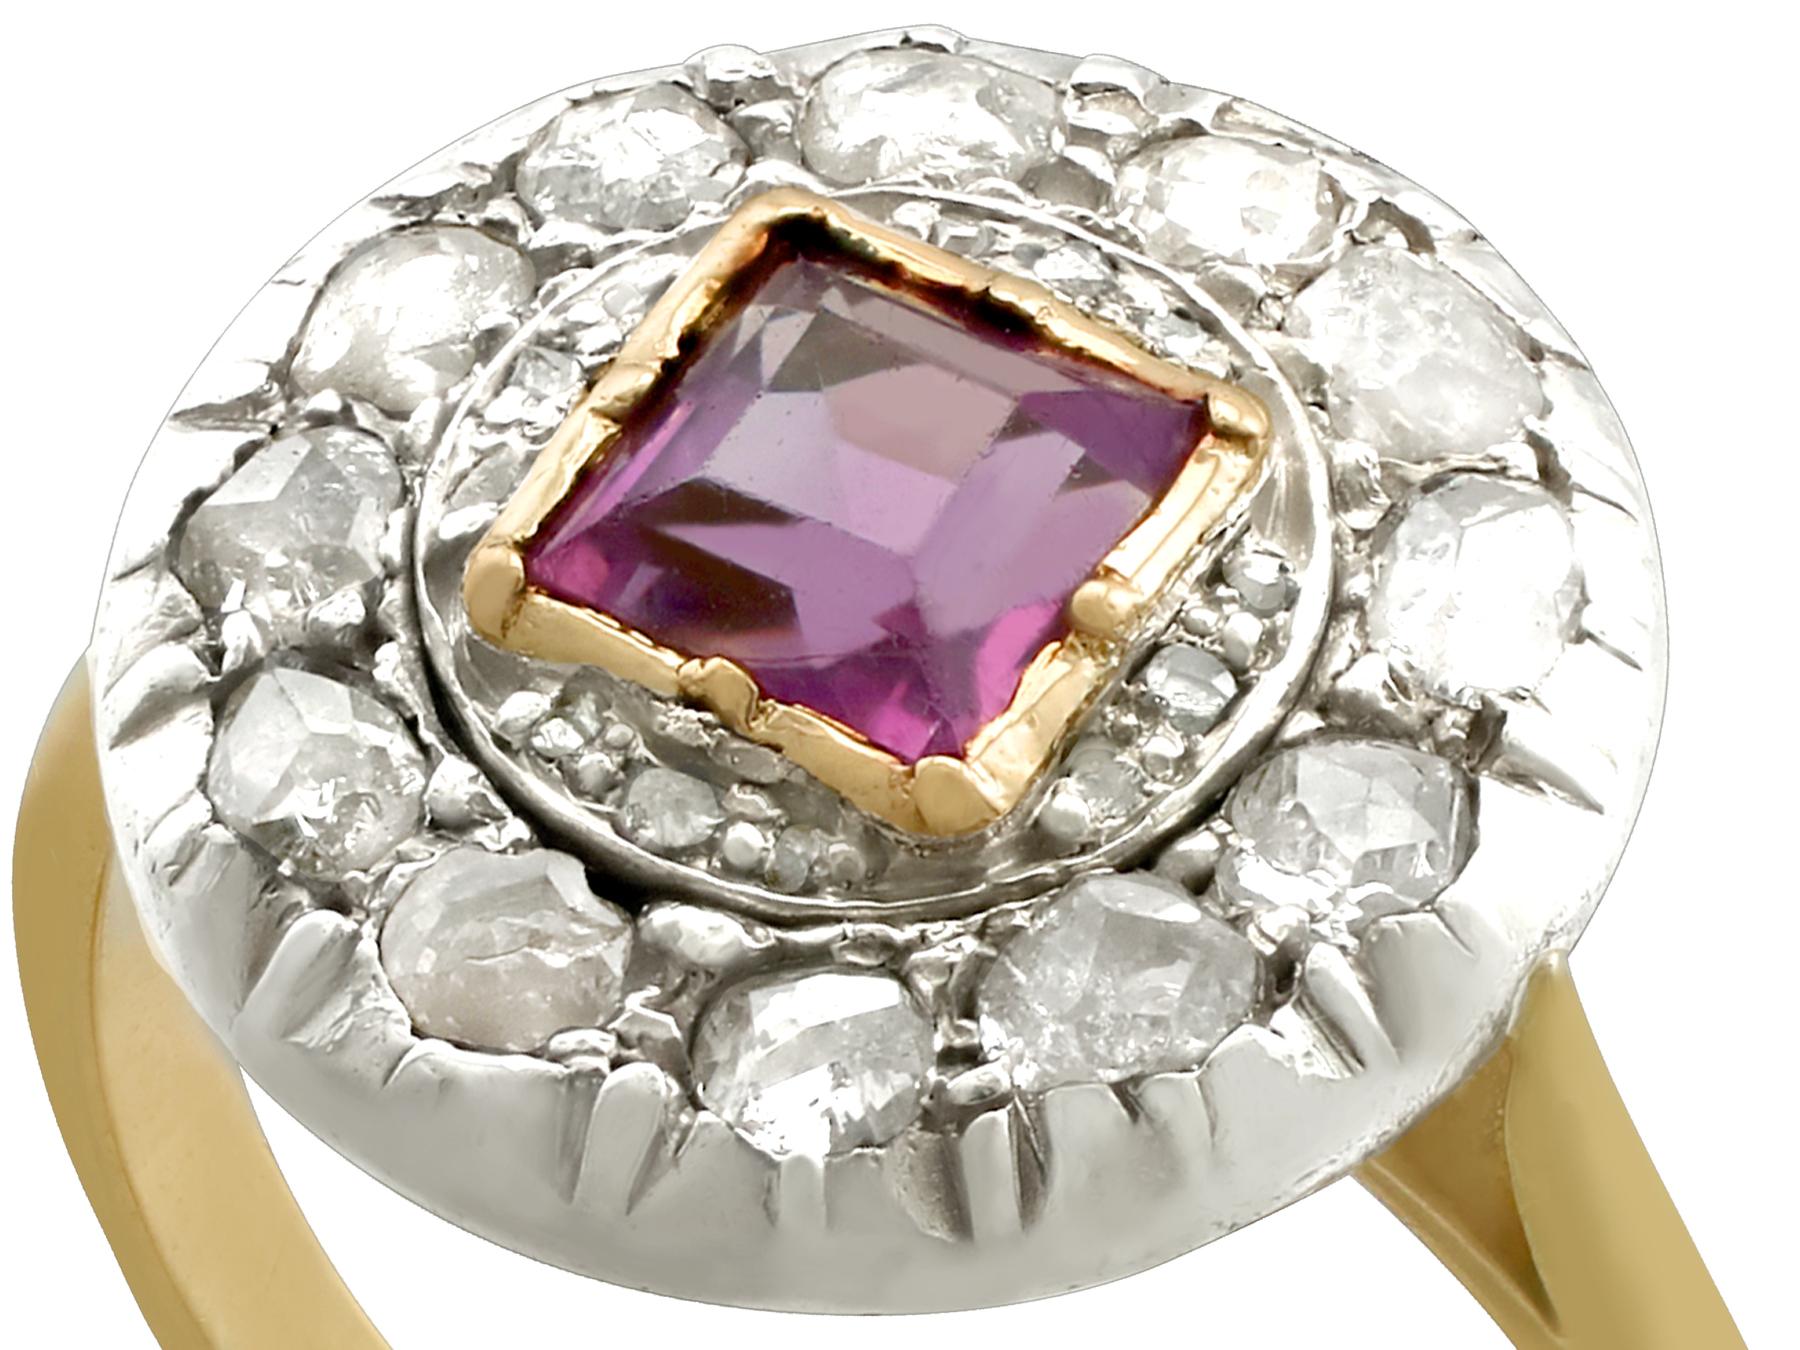 A fine and impressive antique 0.51 carat amethyst and 0.60 carat diamond (total), 18 karat yellow gold and silver set dress ring; part of our diverse antique jewelry and estate jewelry collections

This fine and impressive antique amethyst ring has